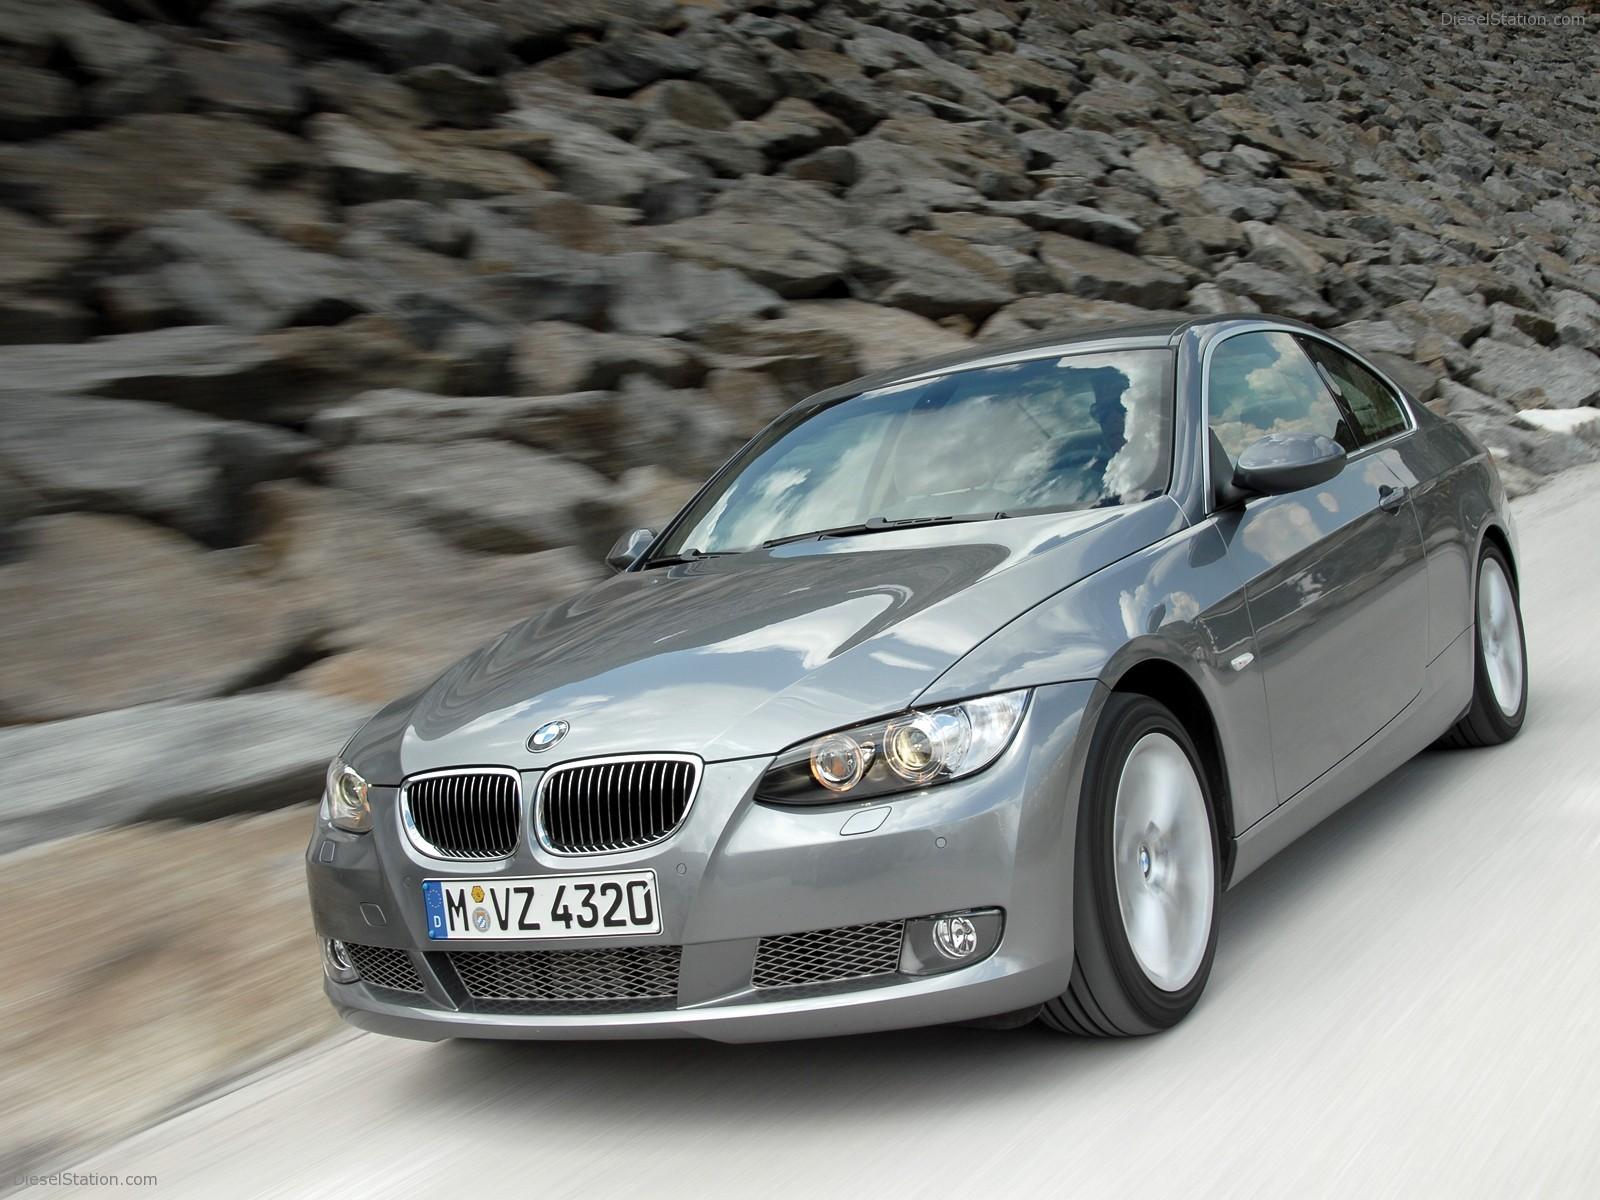 BMW 3 Series Coupe (2006) Exotic Car Wallpaper of 185, Diesel